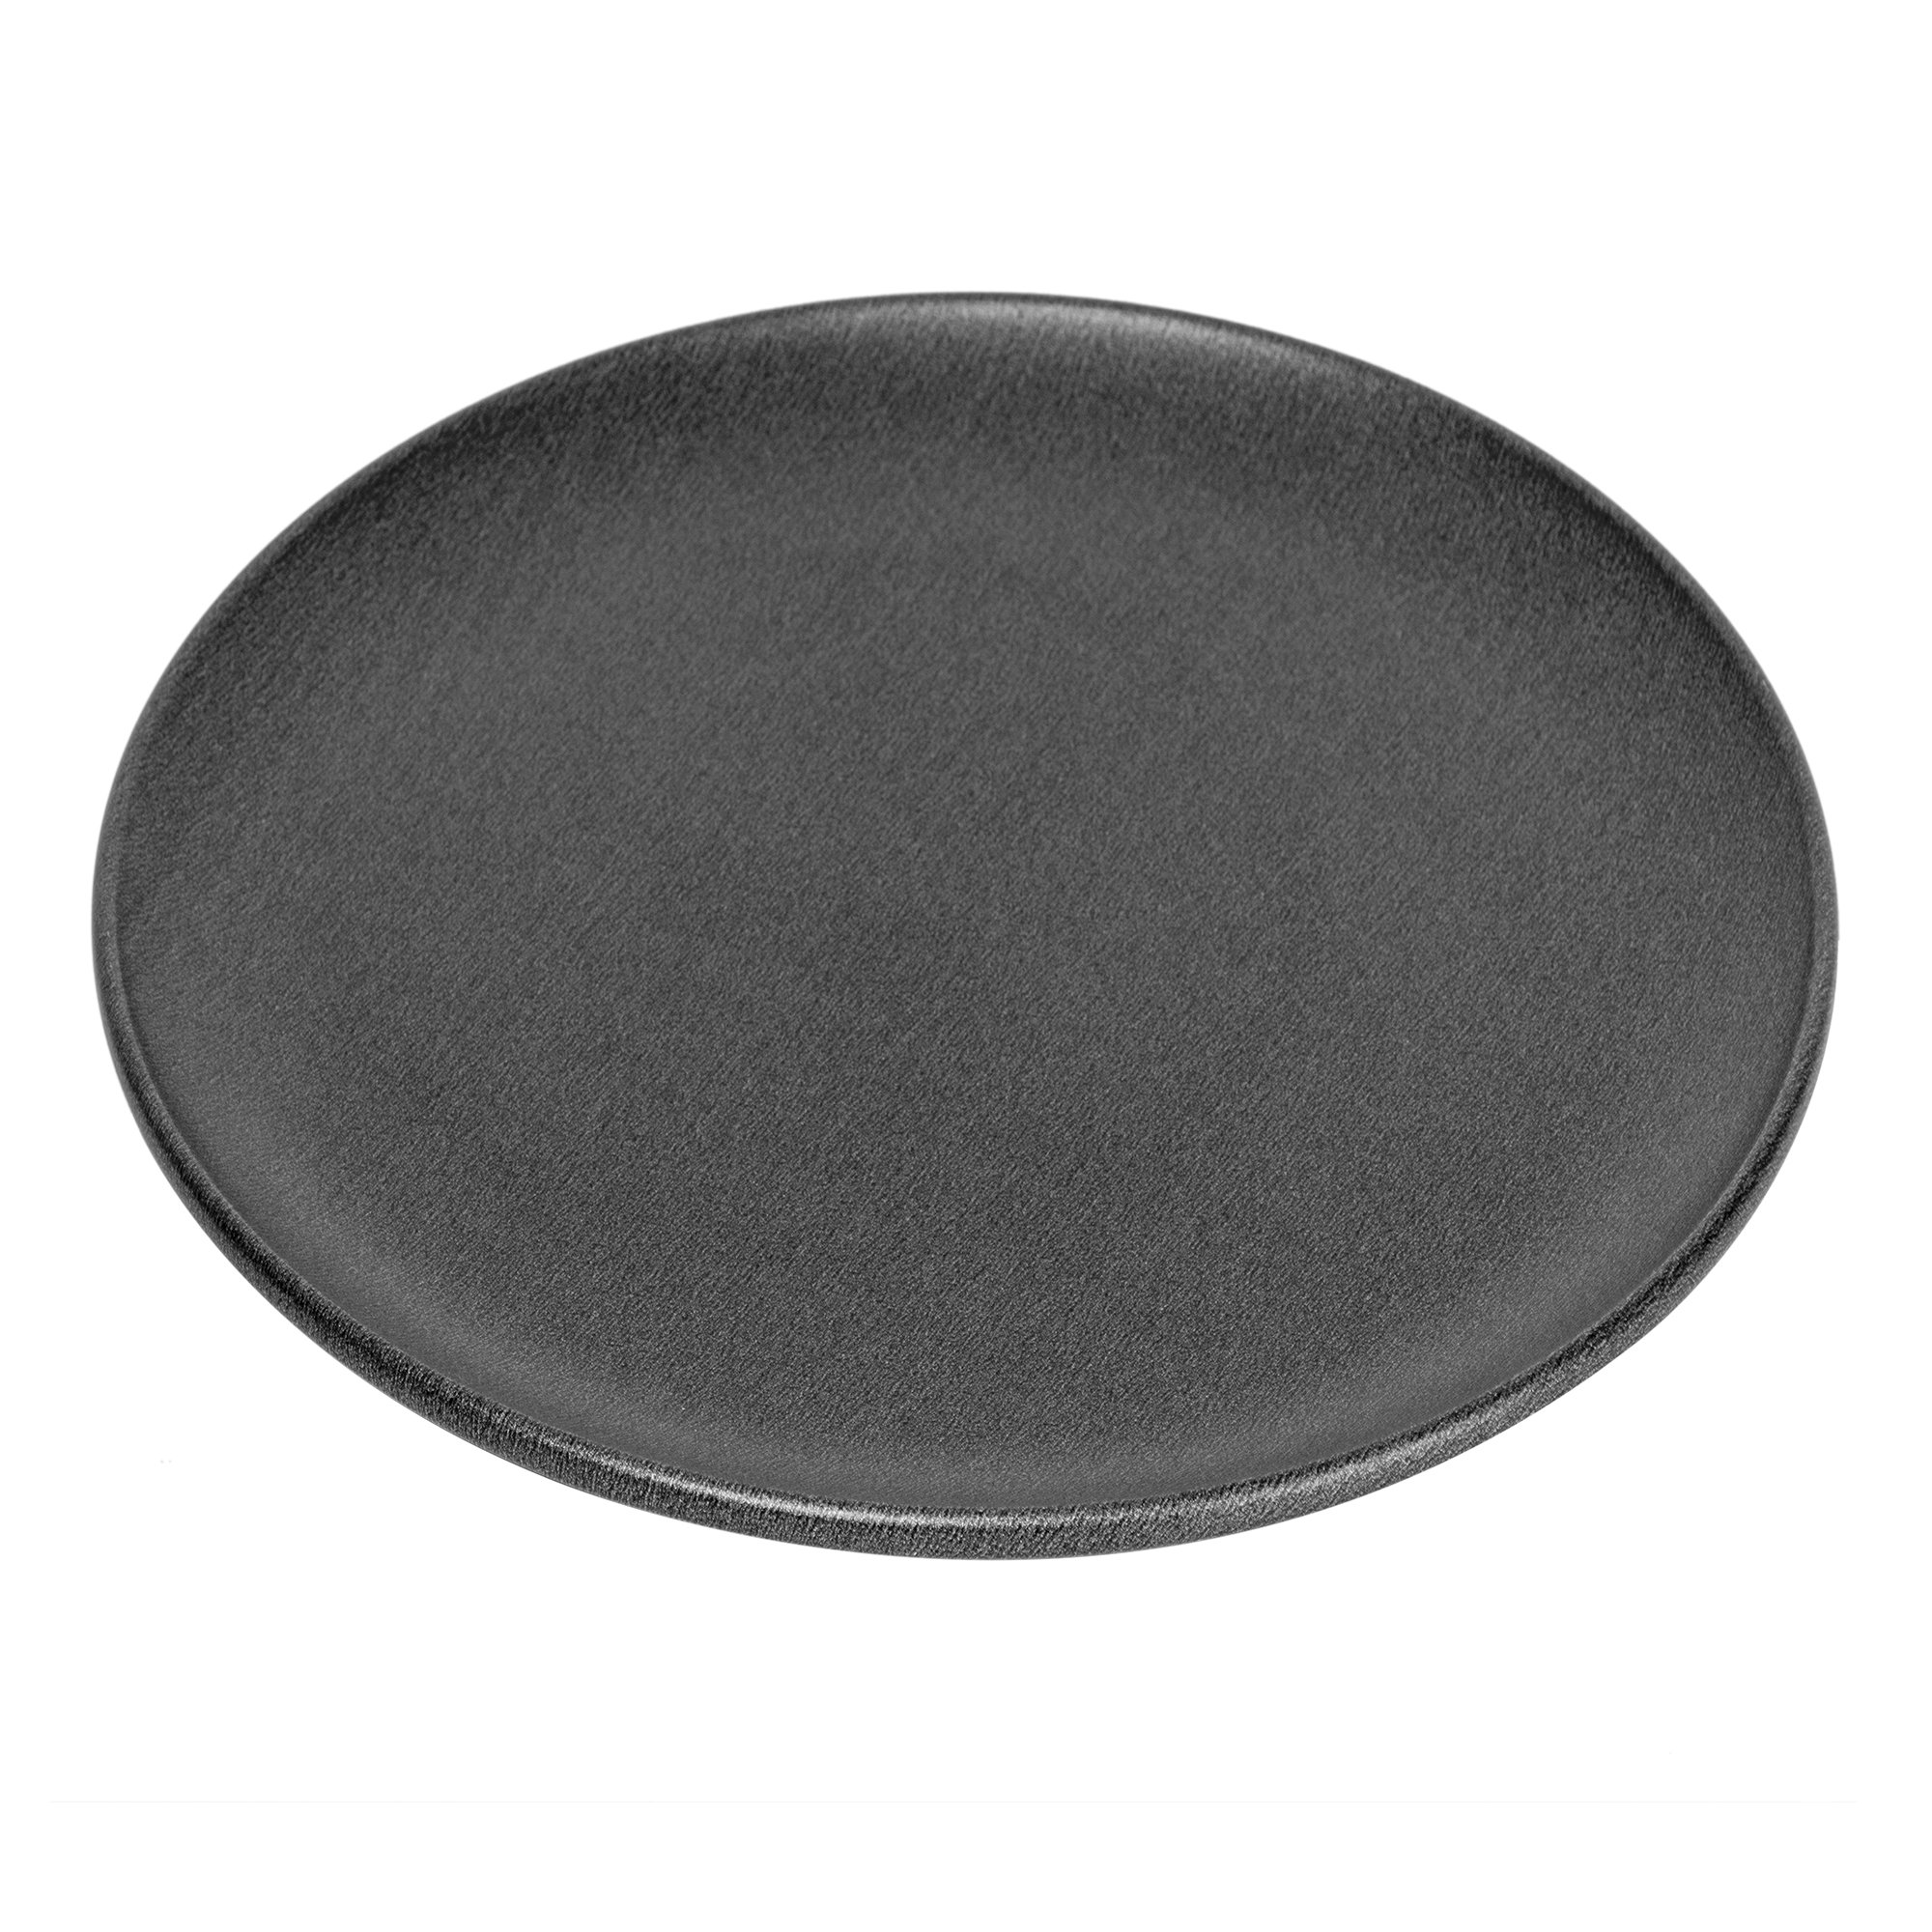 G & S Metal Products Company PB45-MTO Nonstick Pizza, 12, 1 Pan, Black